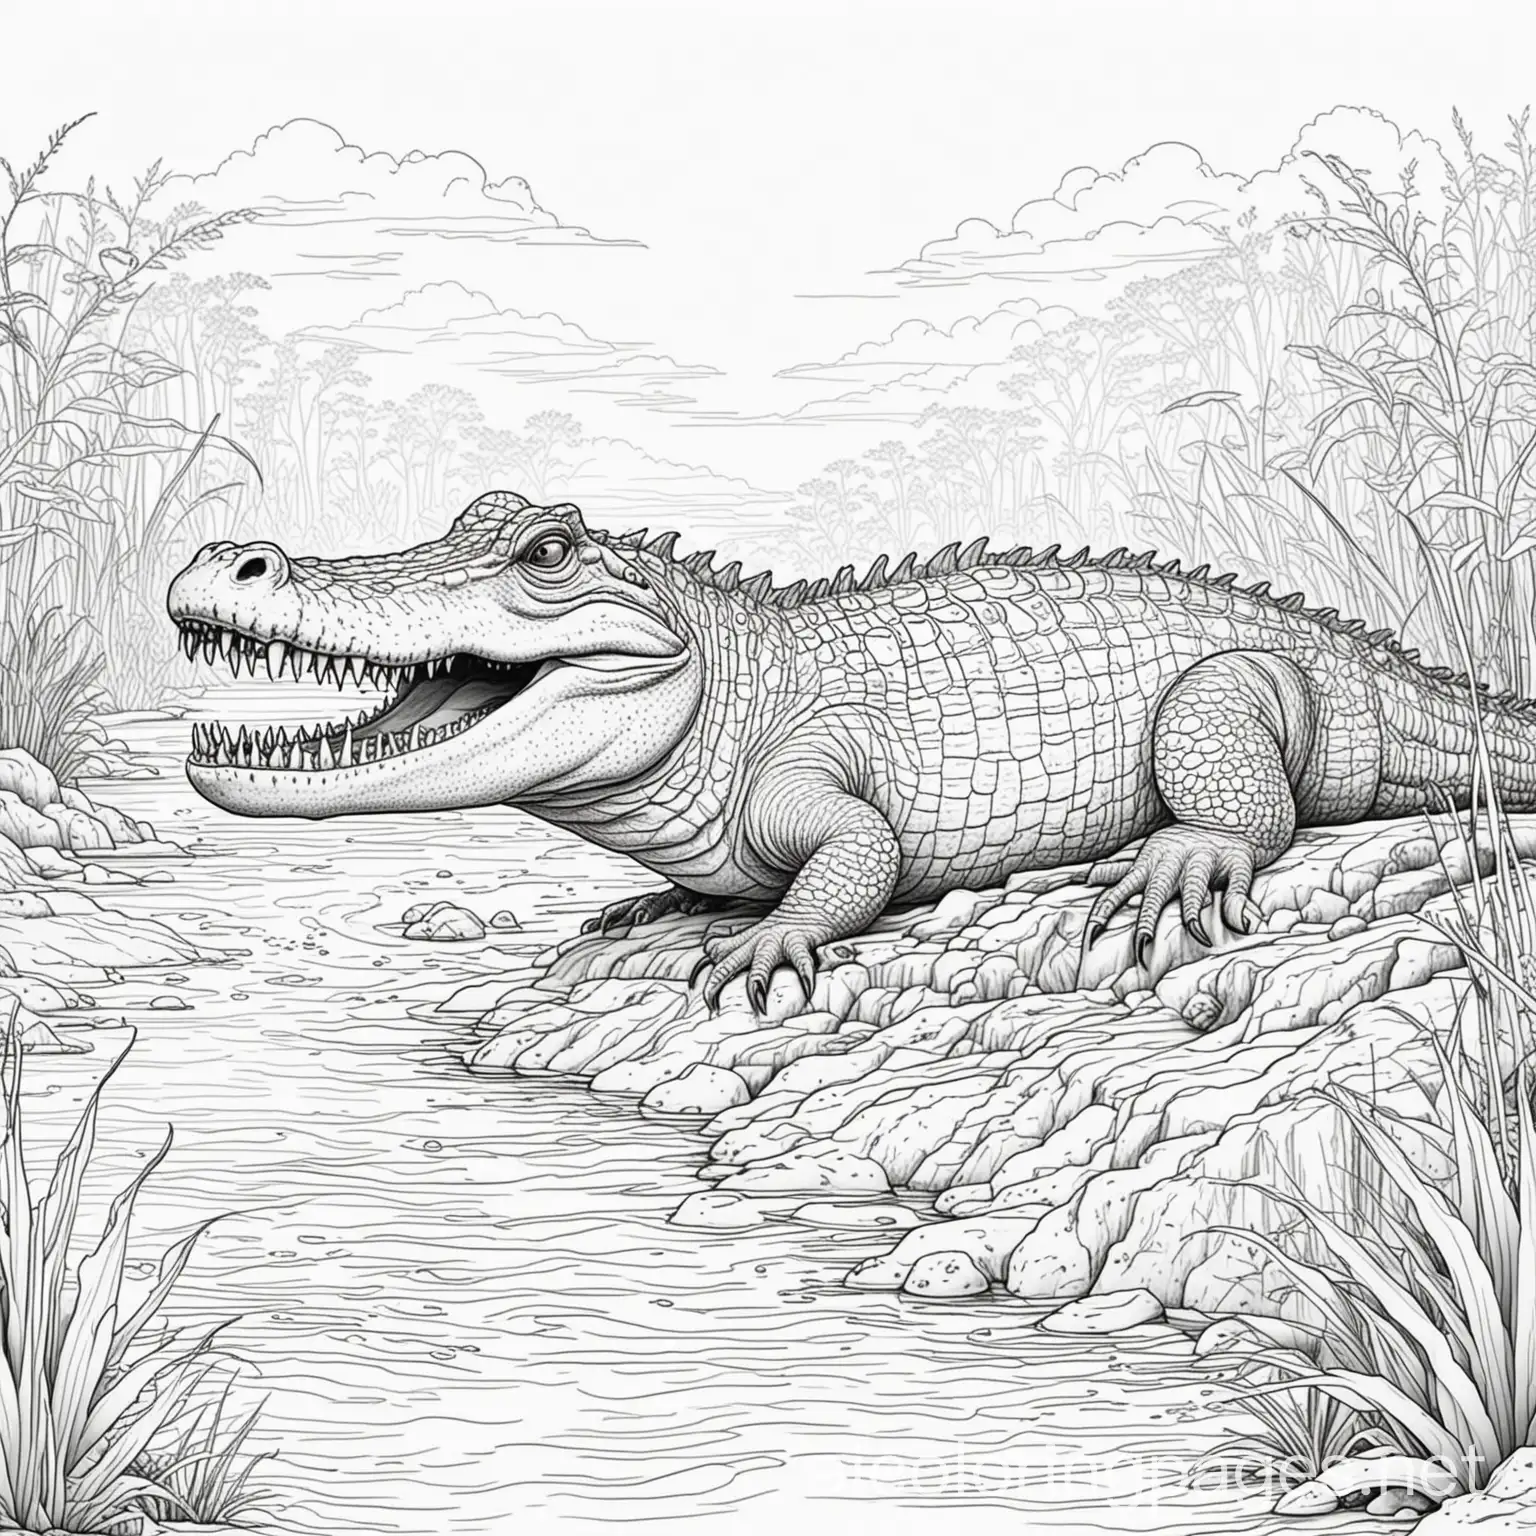 crocodile  picture in savana in river not scary for coloring book children 5 and above, Coloring Page, black and white, line art, white background, Simplicity, Ample White Space. The background of the coloring page is plain white to make it easy for young children to color within the lines. The outlines of all the subjects are easy to distinguish, making it simple for kids to color without too much difficulty